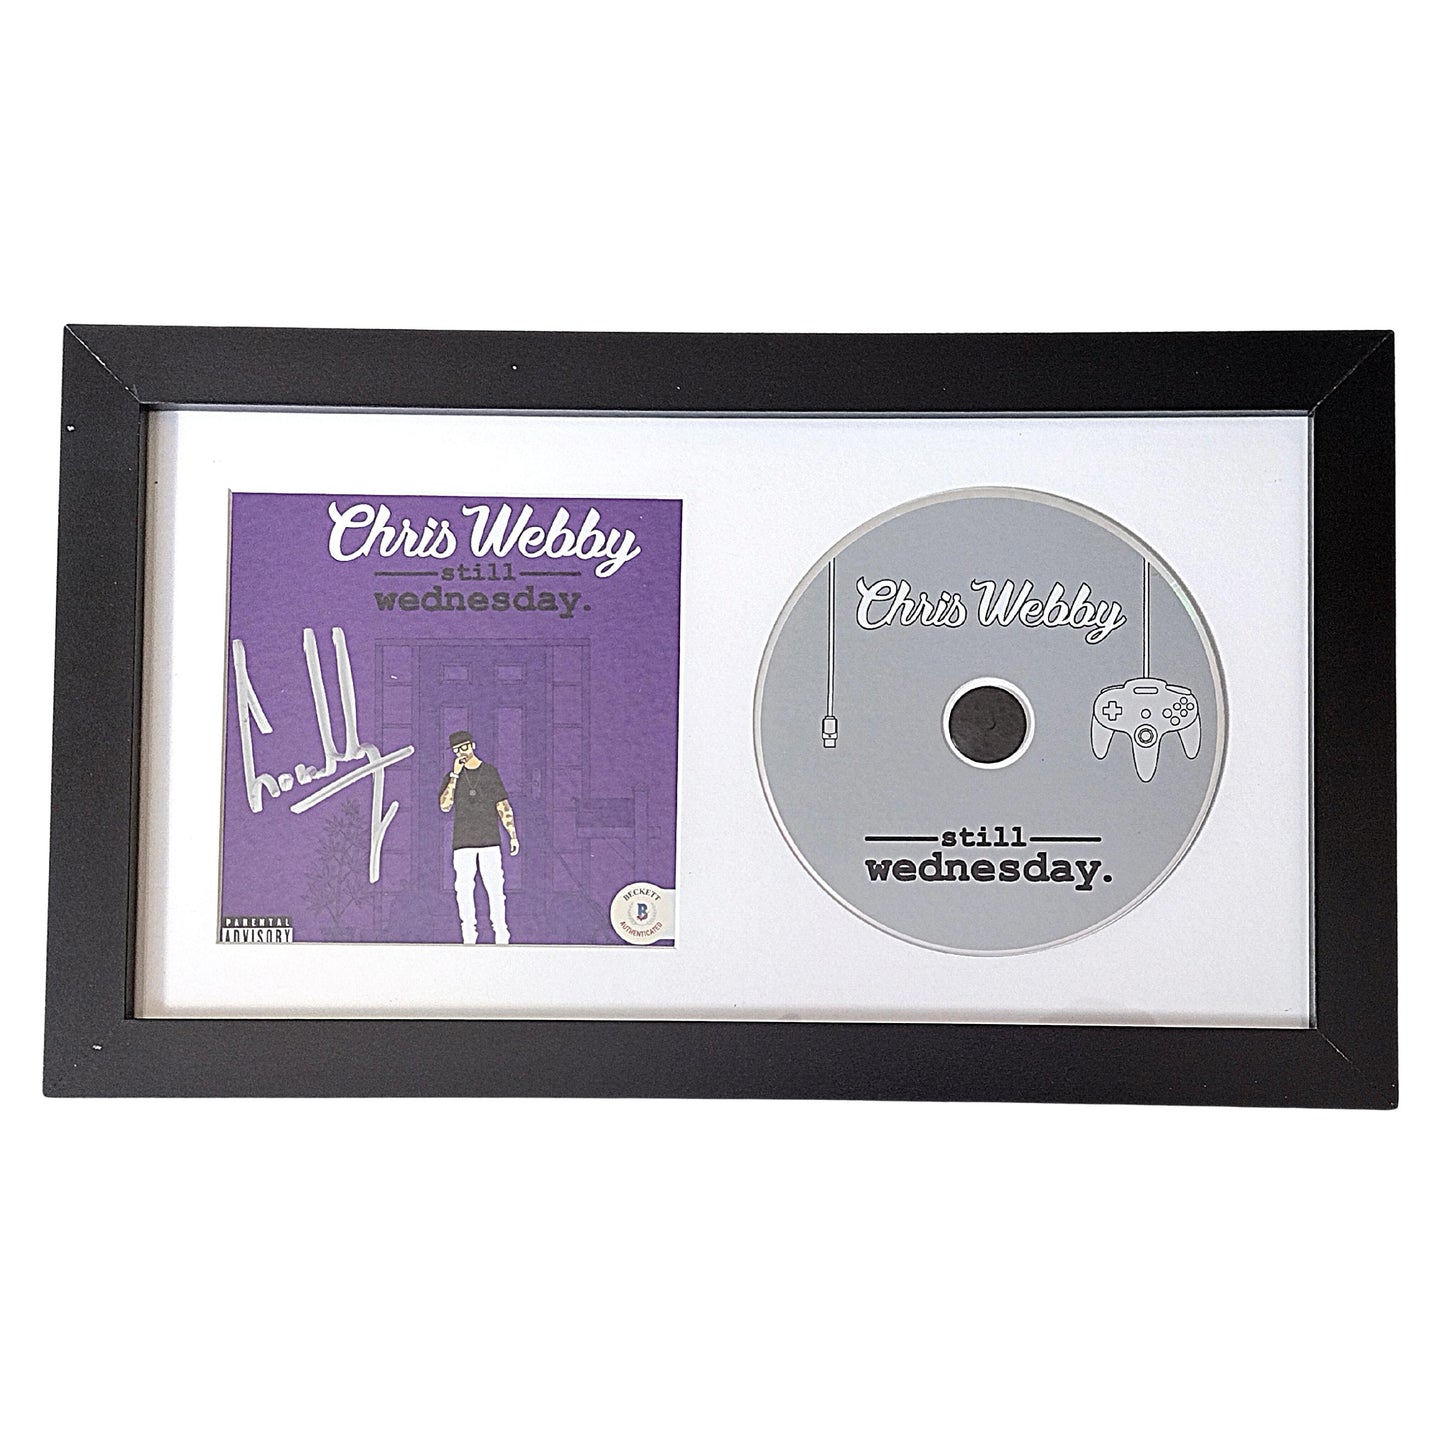 Music- Autographed- Chris Webby Signed Still Wednesday Compact Disc Cover Framed CD Wall Display Beckett Authentication 101